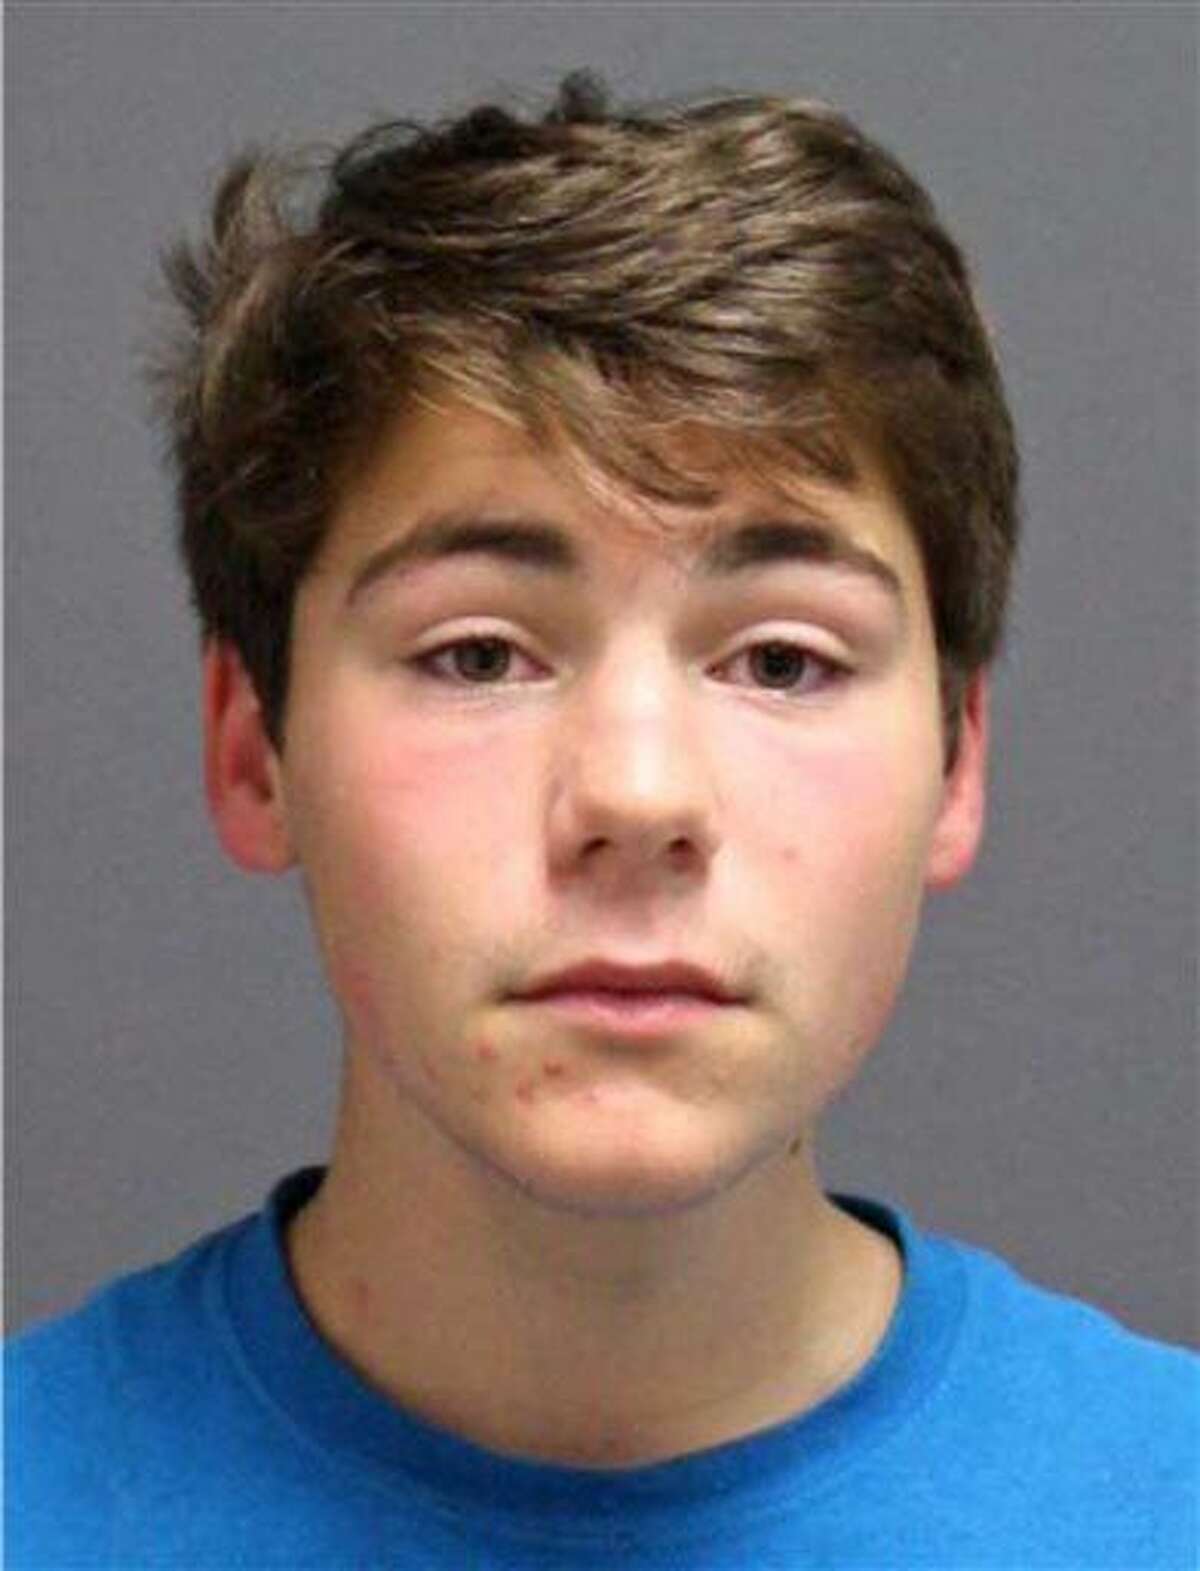 This undated photo provided by the University of Connecticut police department shows student Luke Gatti, 19, of Bayville, N.Y., who was arrested Sunday night, Oct. 4, following an altercation over purchasing macaroni and cheese at a market on the school's Storrs, Conn., campus. A 9-minute, obscenity-laced video clip went viral, showing Gatti arguing with and eventually shoving a manager at a food court inside the school's student union.